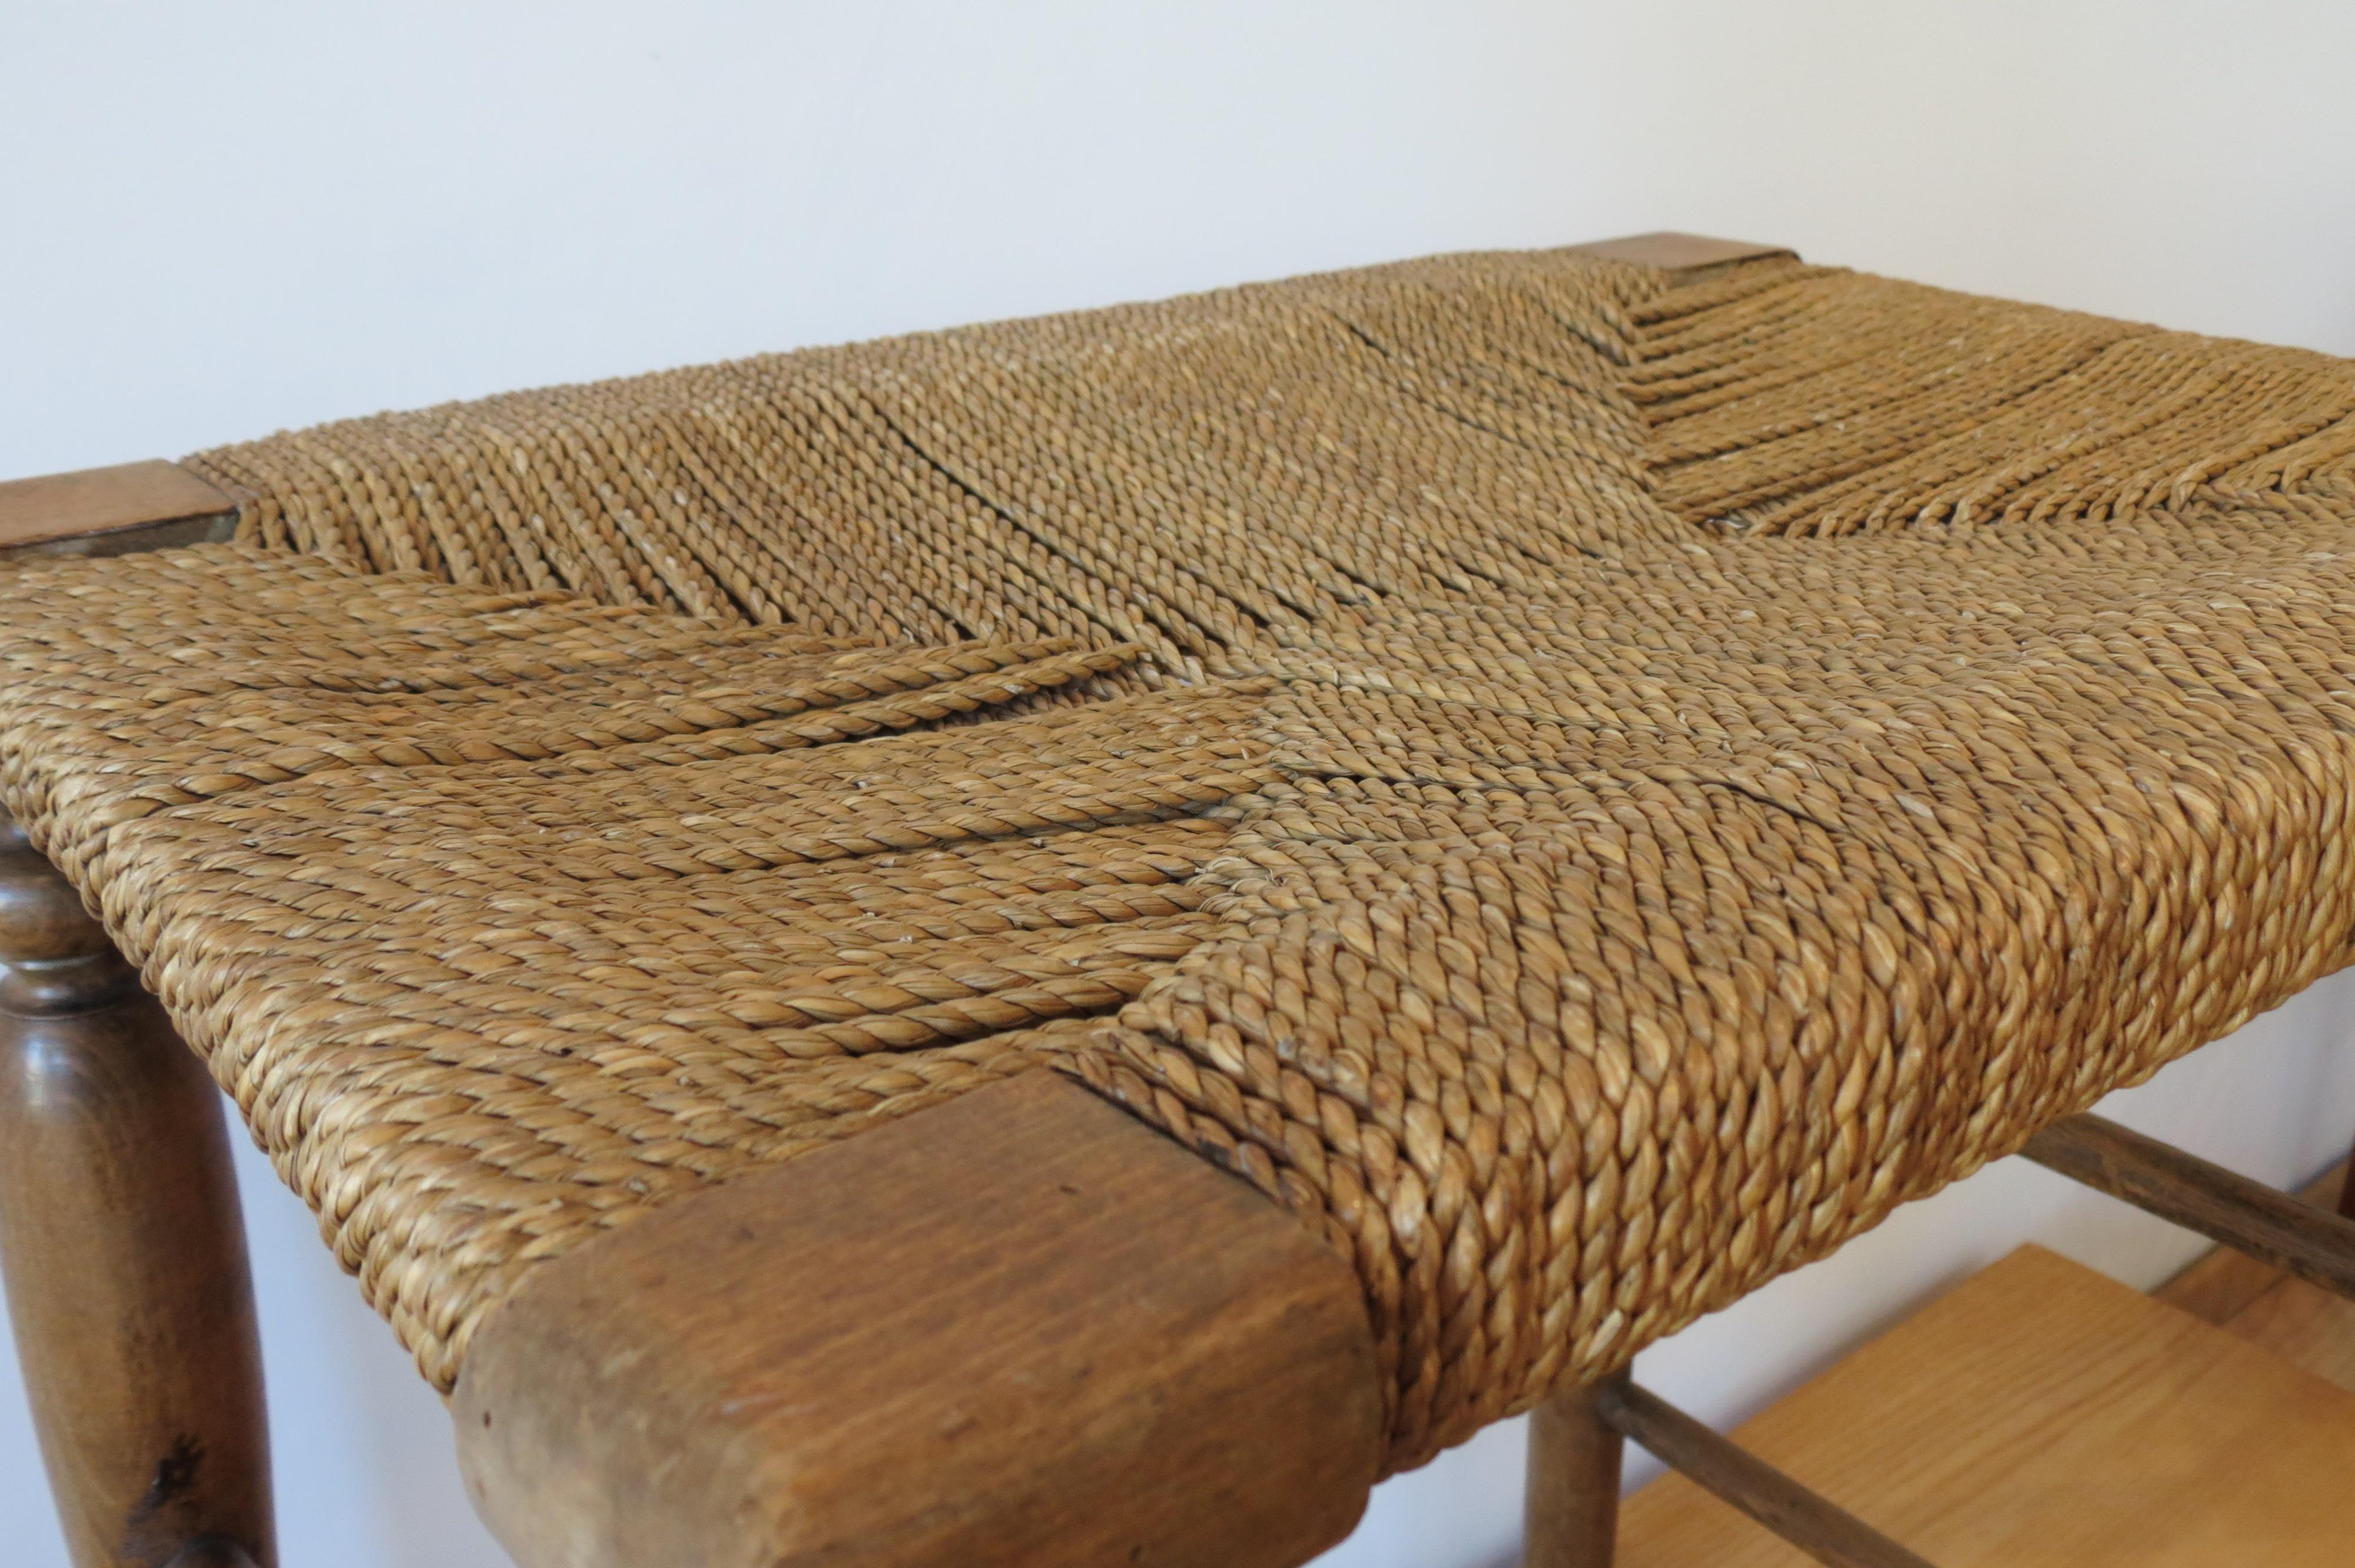 Birch Country Wooden Stool with Woven Seat, 1900s